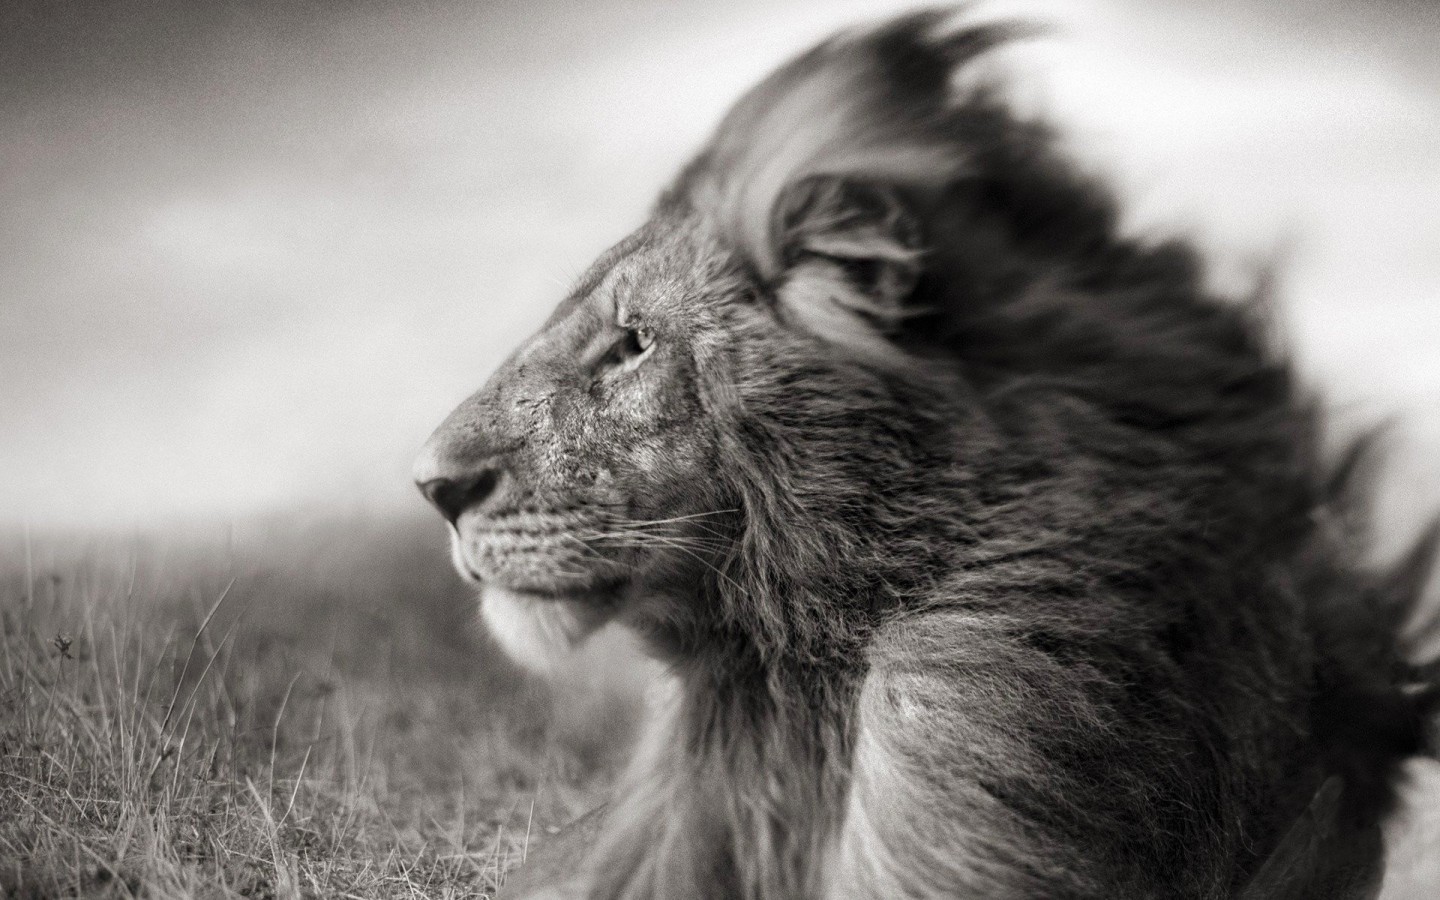 Portrait Of A Lion In Black And White Wallpaper for Desktop 1440x900